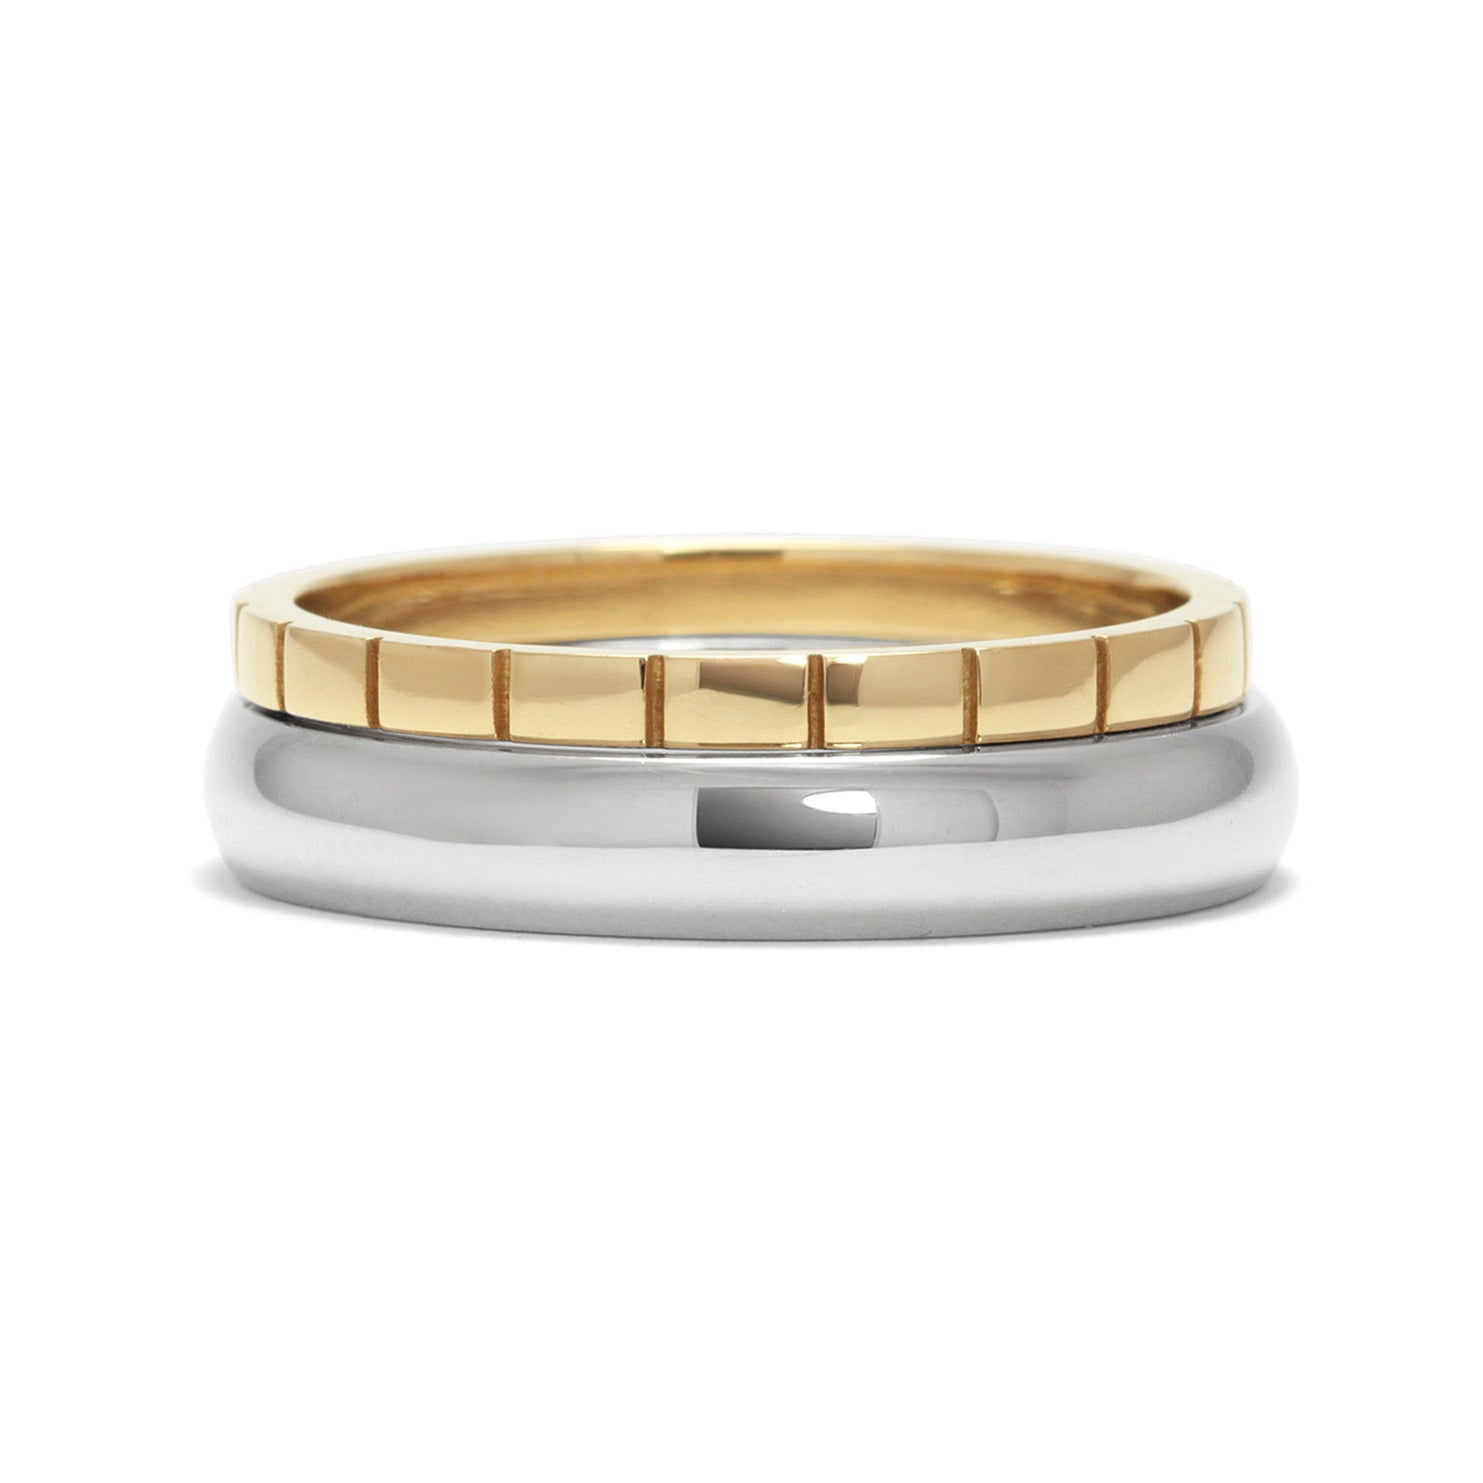 Freedom Ethical Gold Wedding Ring: 2 Bands